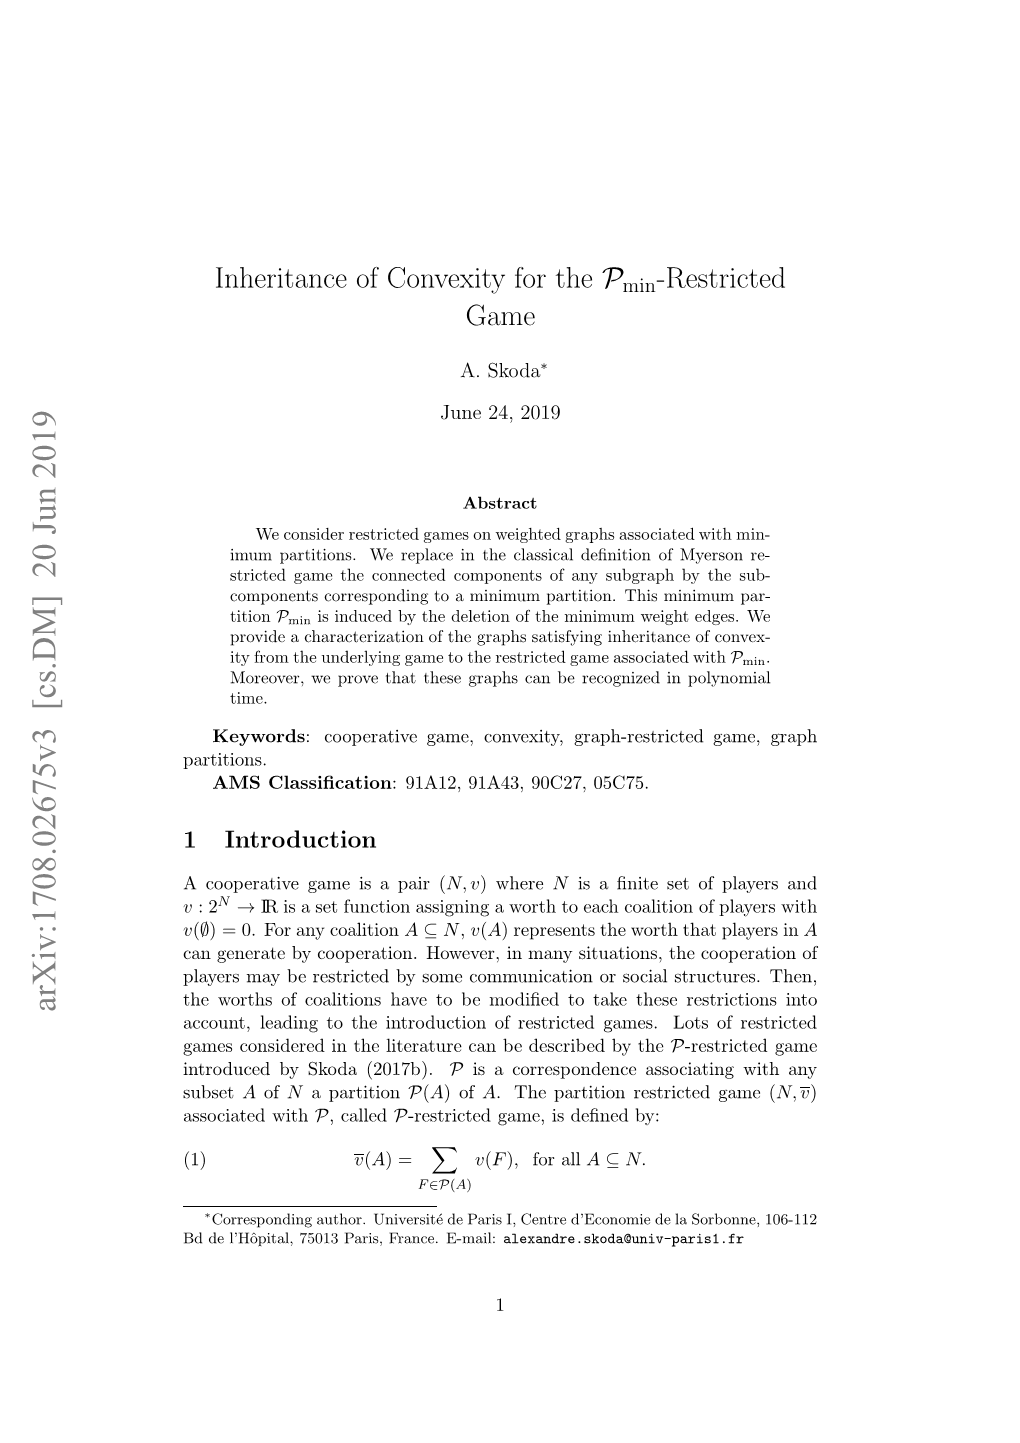 Inheritance of Convexity for the Pmin-Restricted Game